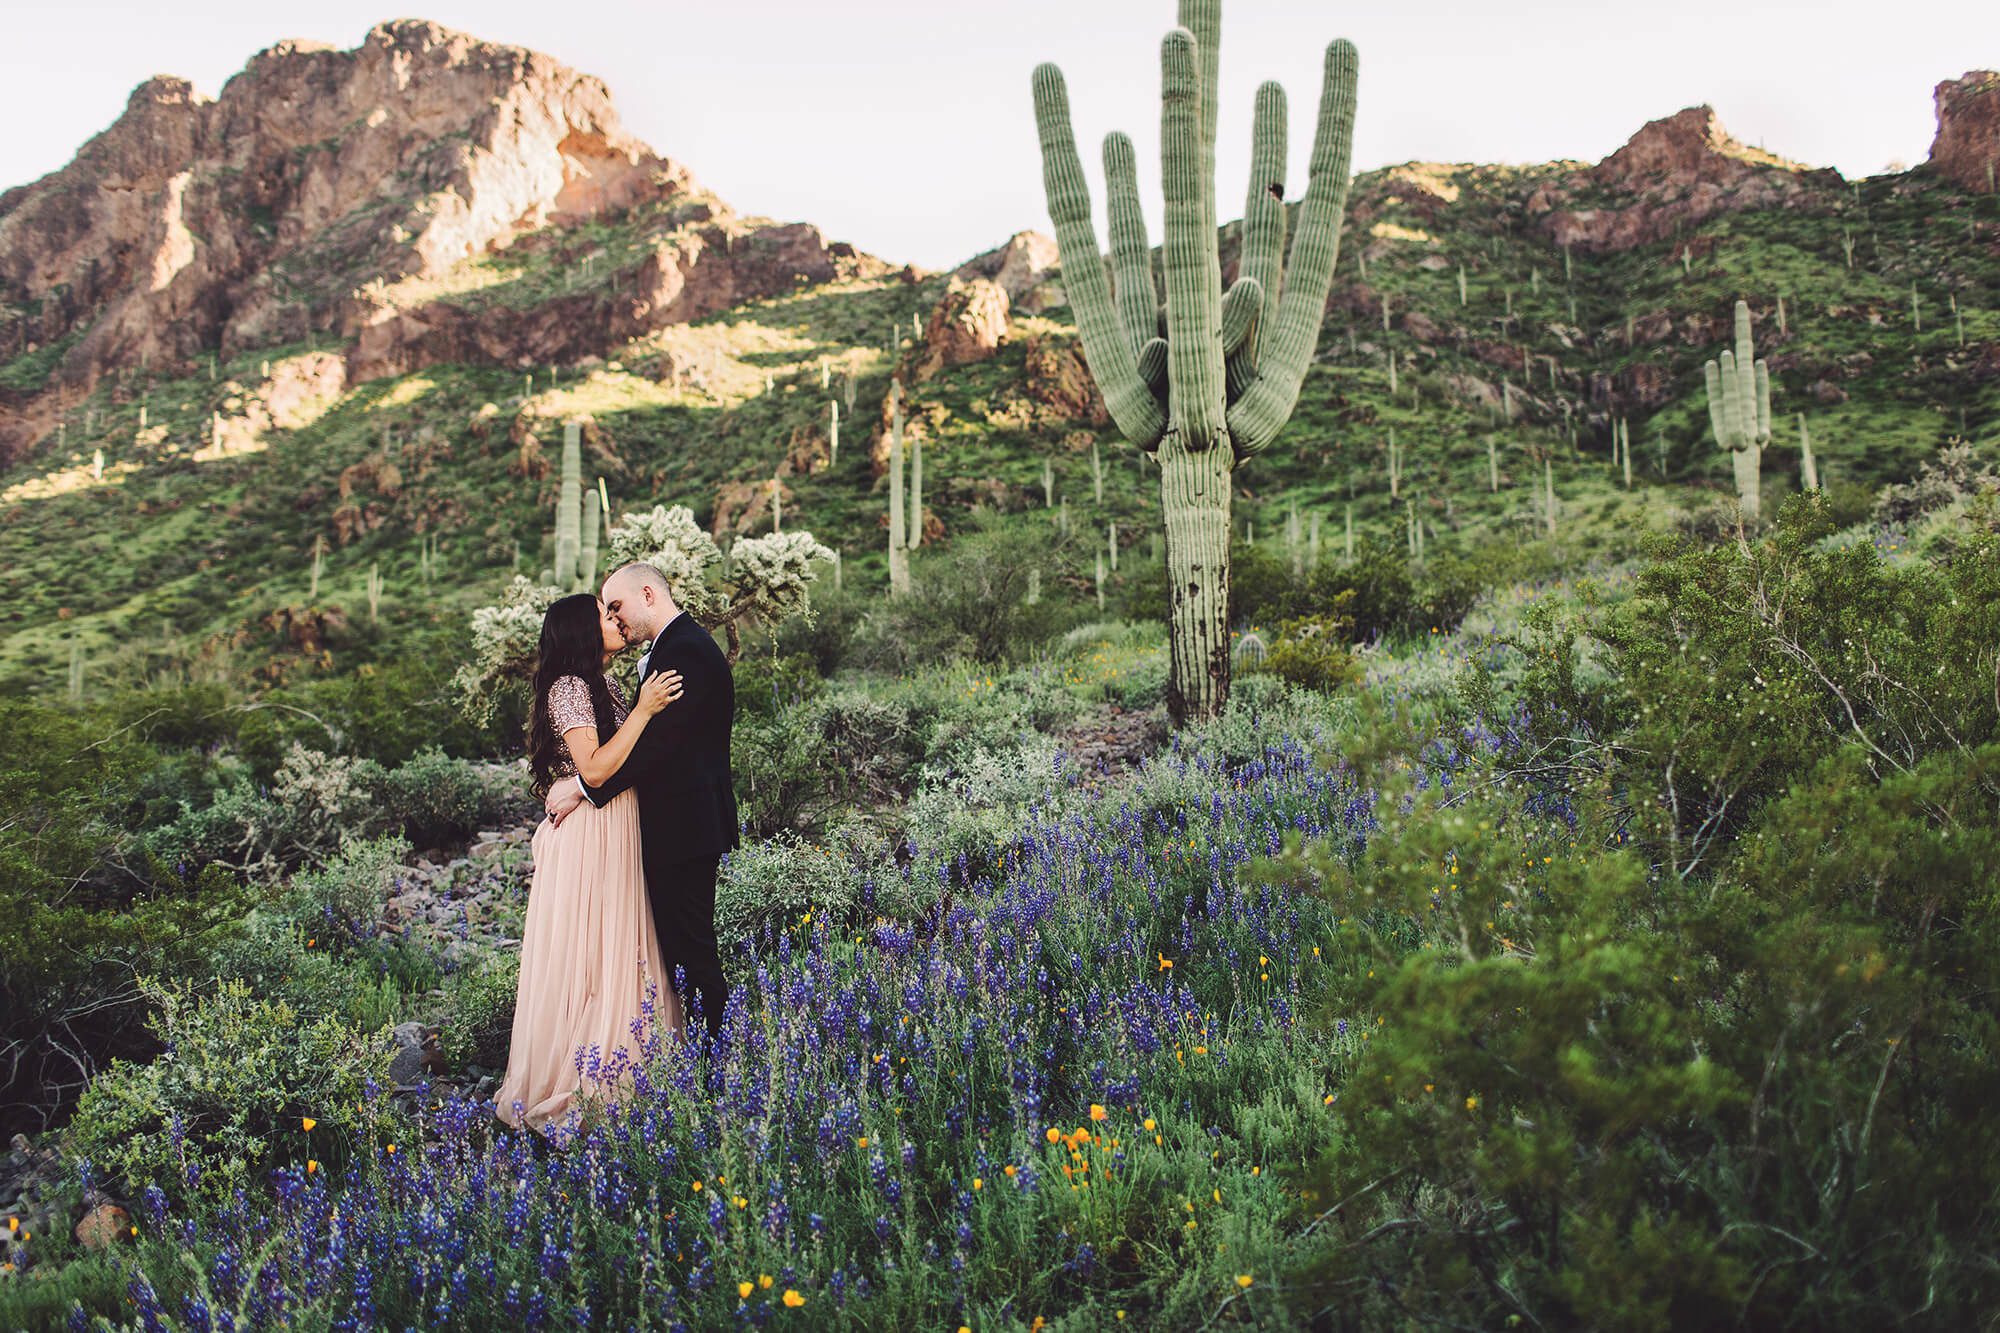 The Paxman's kiss surrounded by wildflowers and Picacho Peak in the background during their wildflower couple's session